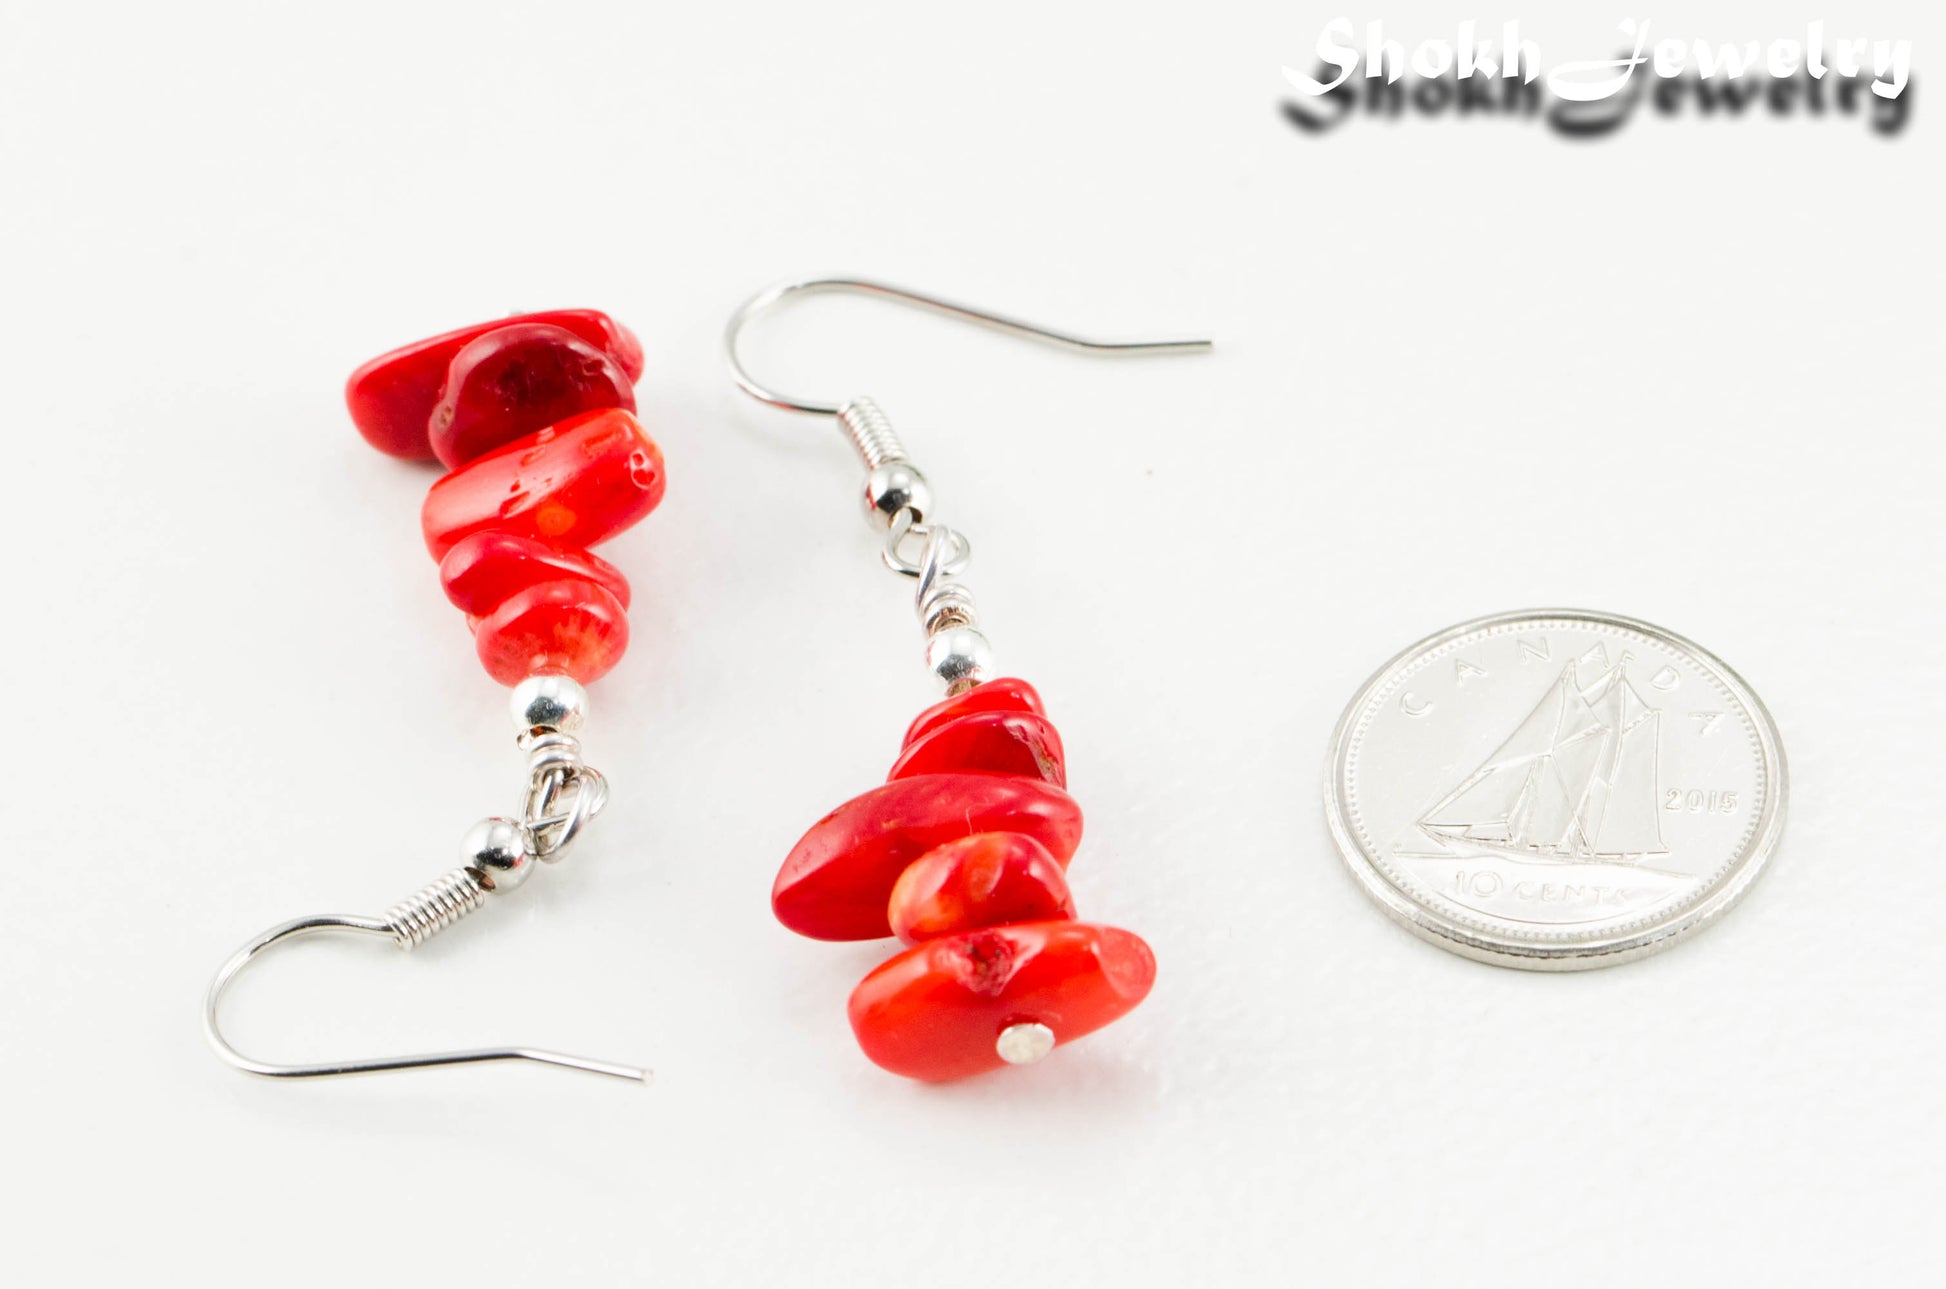 Natural Red Coral Chip Earrings beside a dime